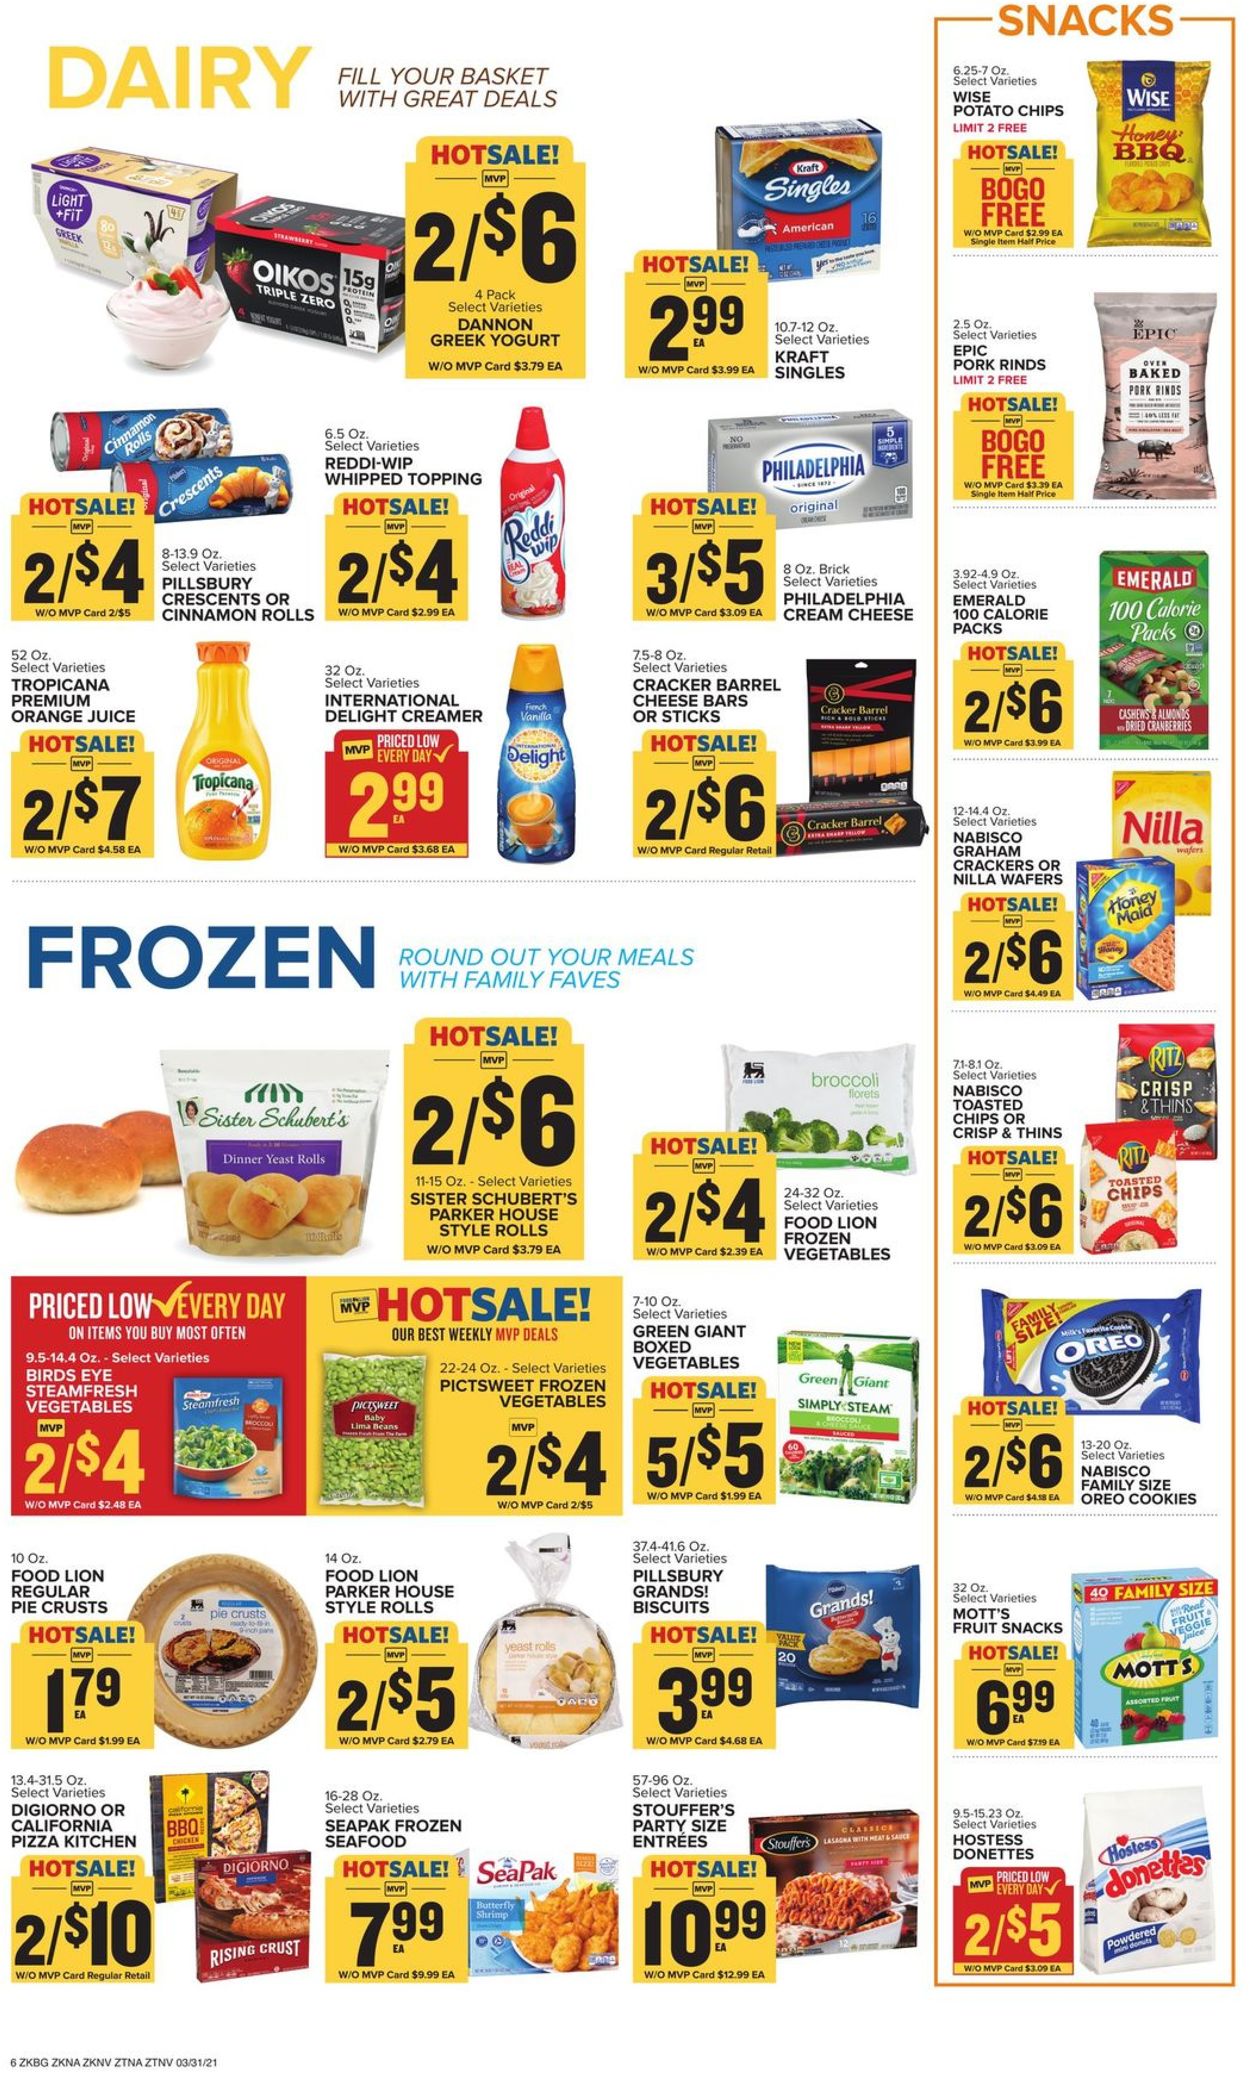 Food Lion Easter 2021 ad Weekly Ad Circular - valid 03/31-04/06/2021 (Page 9)